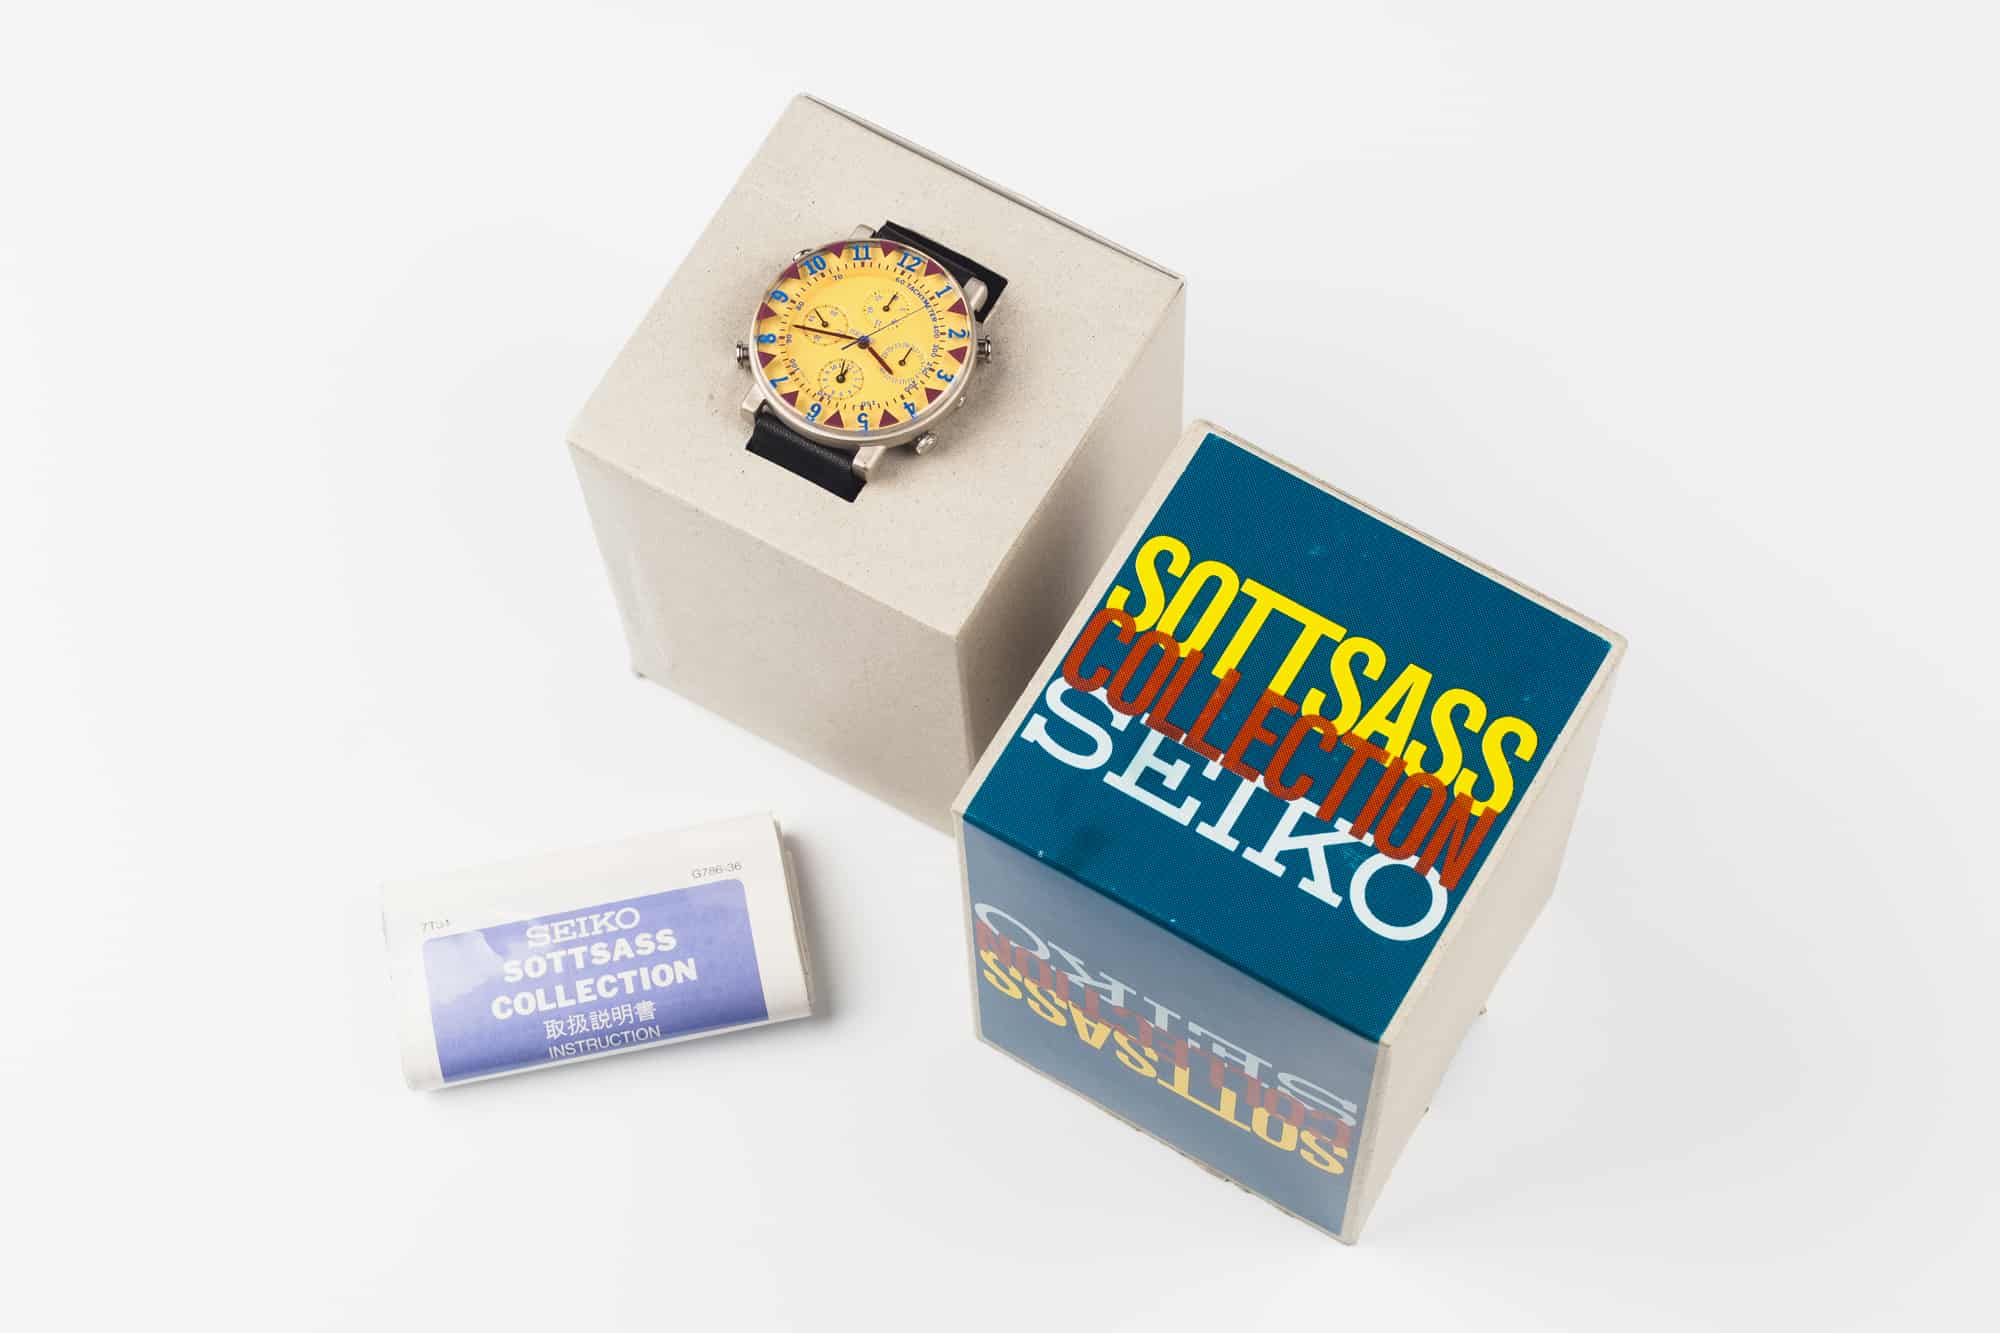 Up for Auction, Ultra-Rare Seikos by Italian Designer Ettore Sottsass -  Worn & Wound